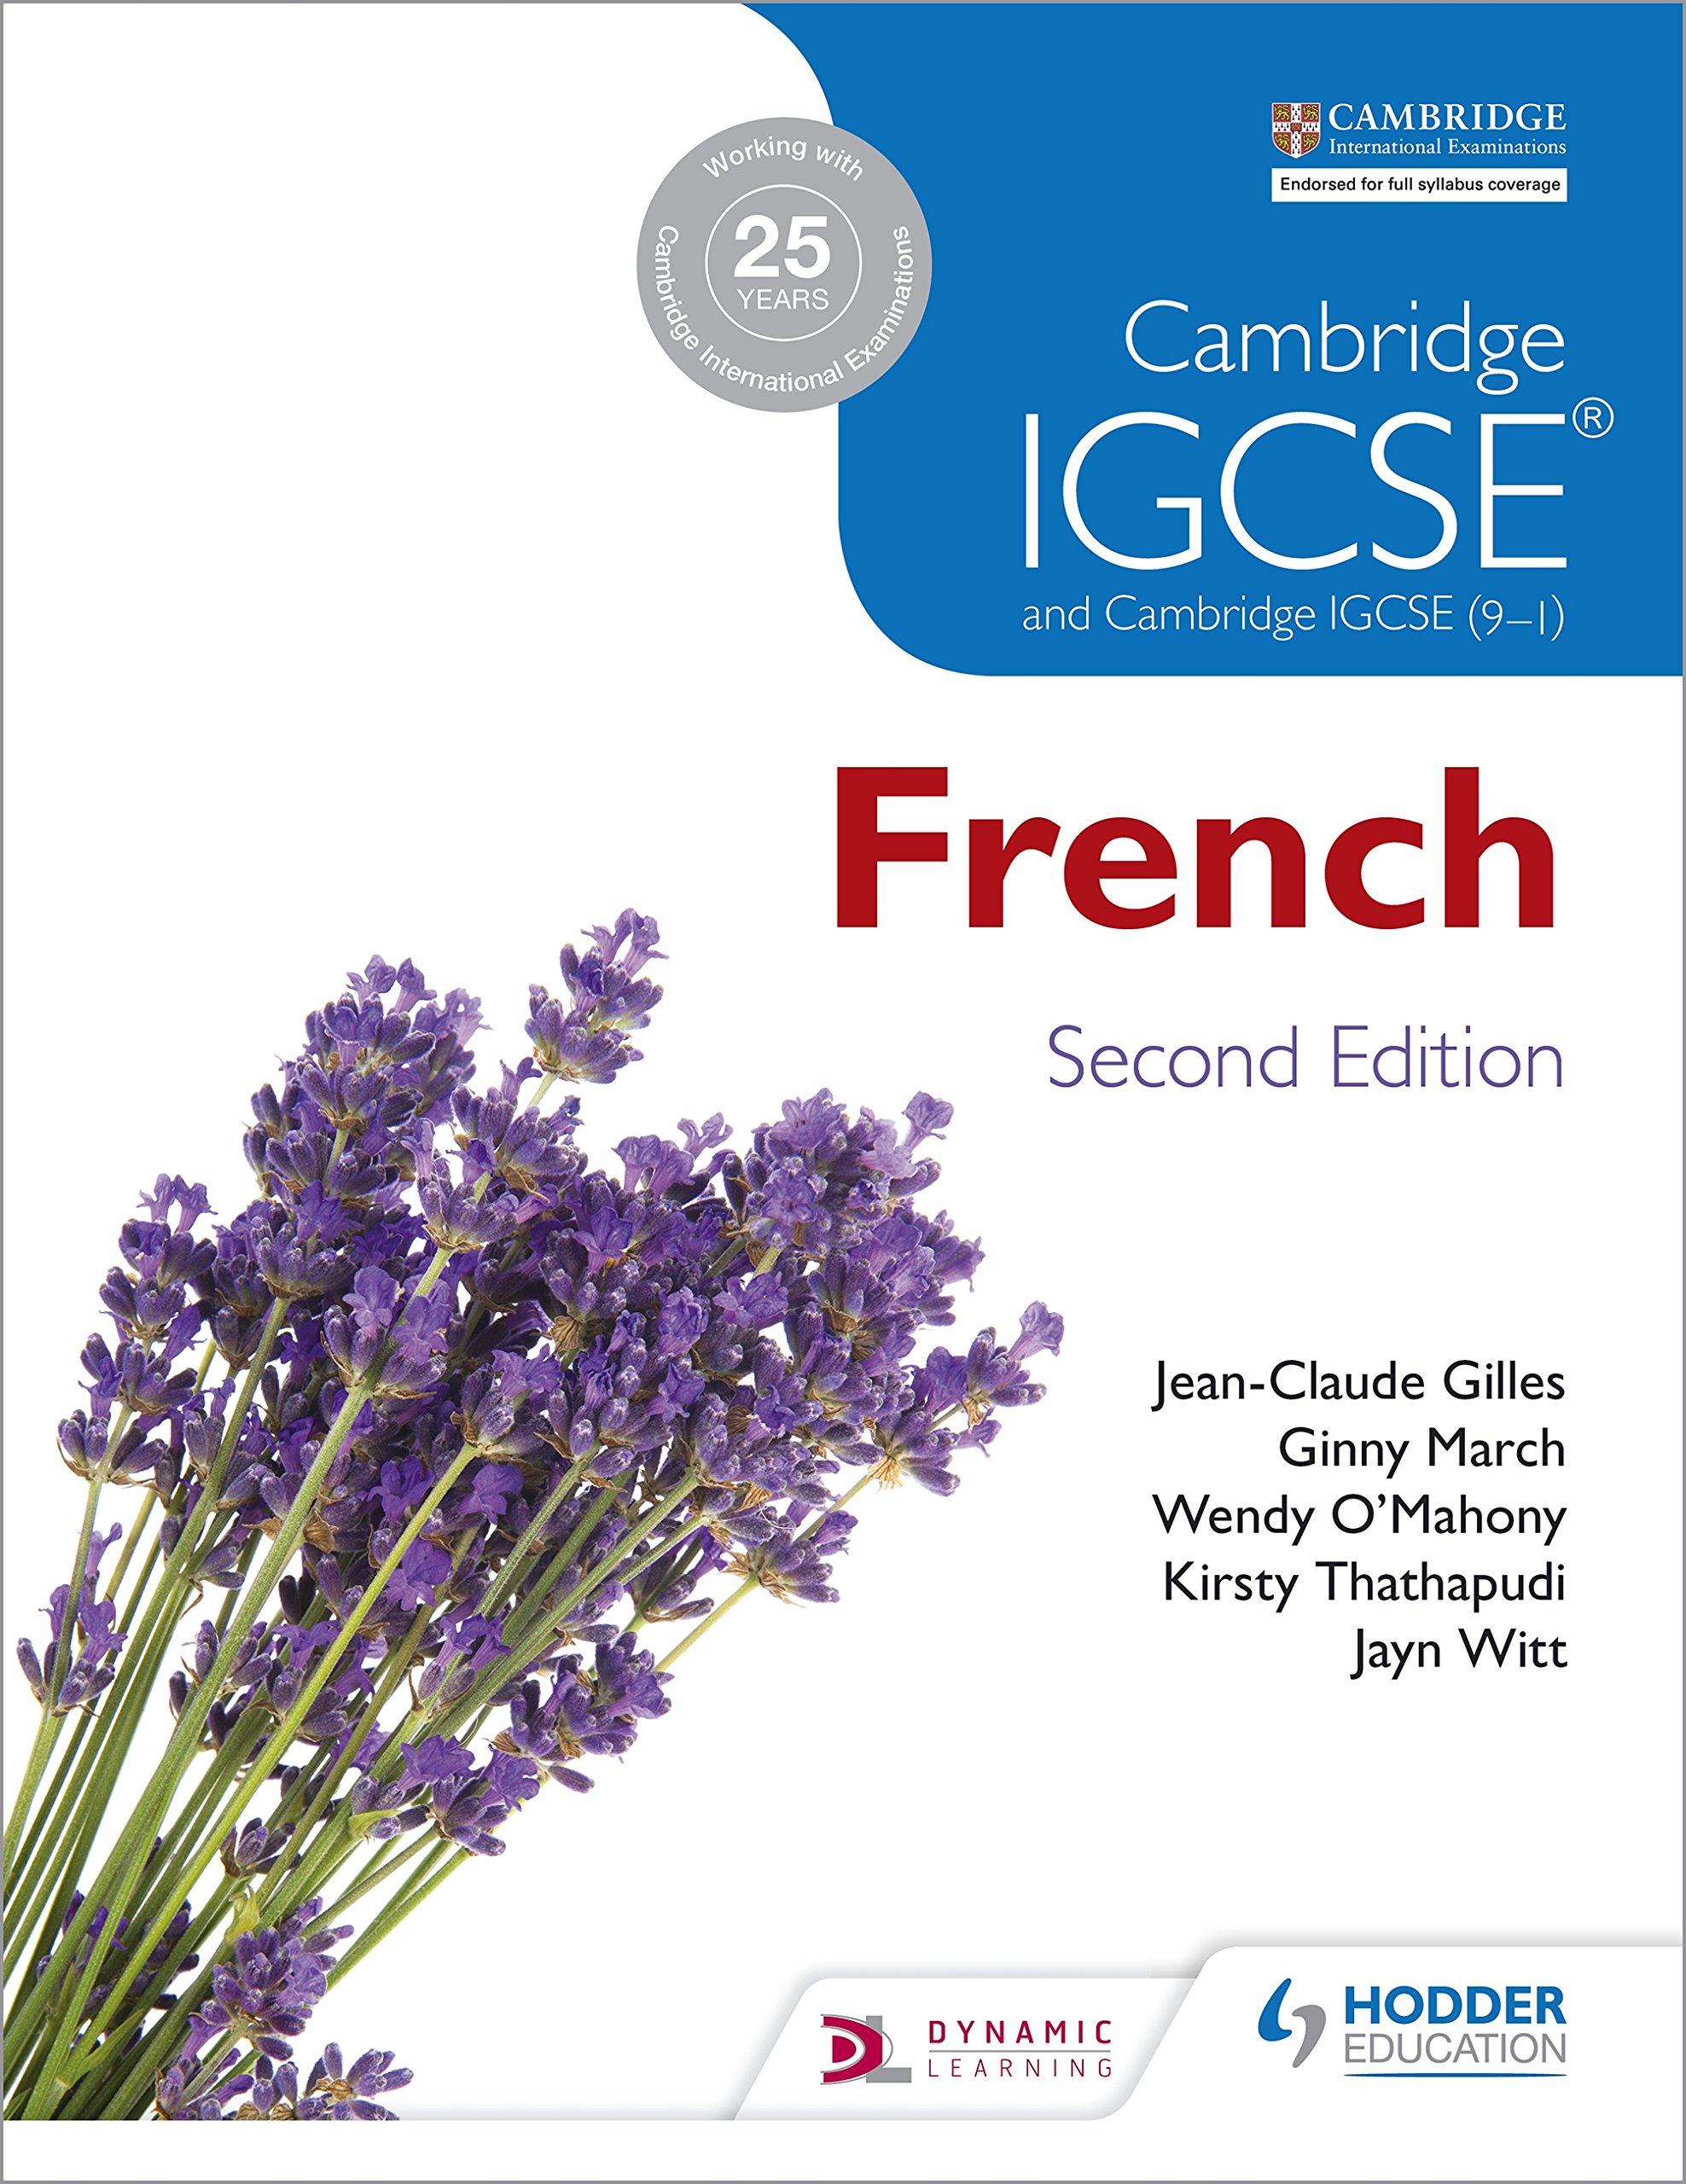 Cambridge IGCSE French Student Book Second Edition | Jean-Claude Gilles